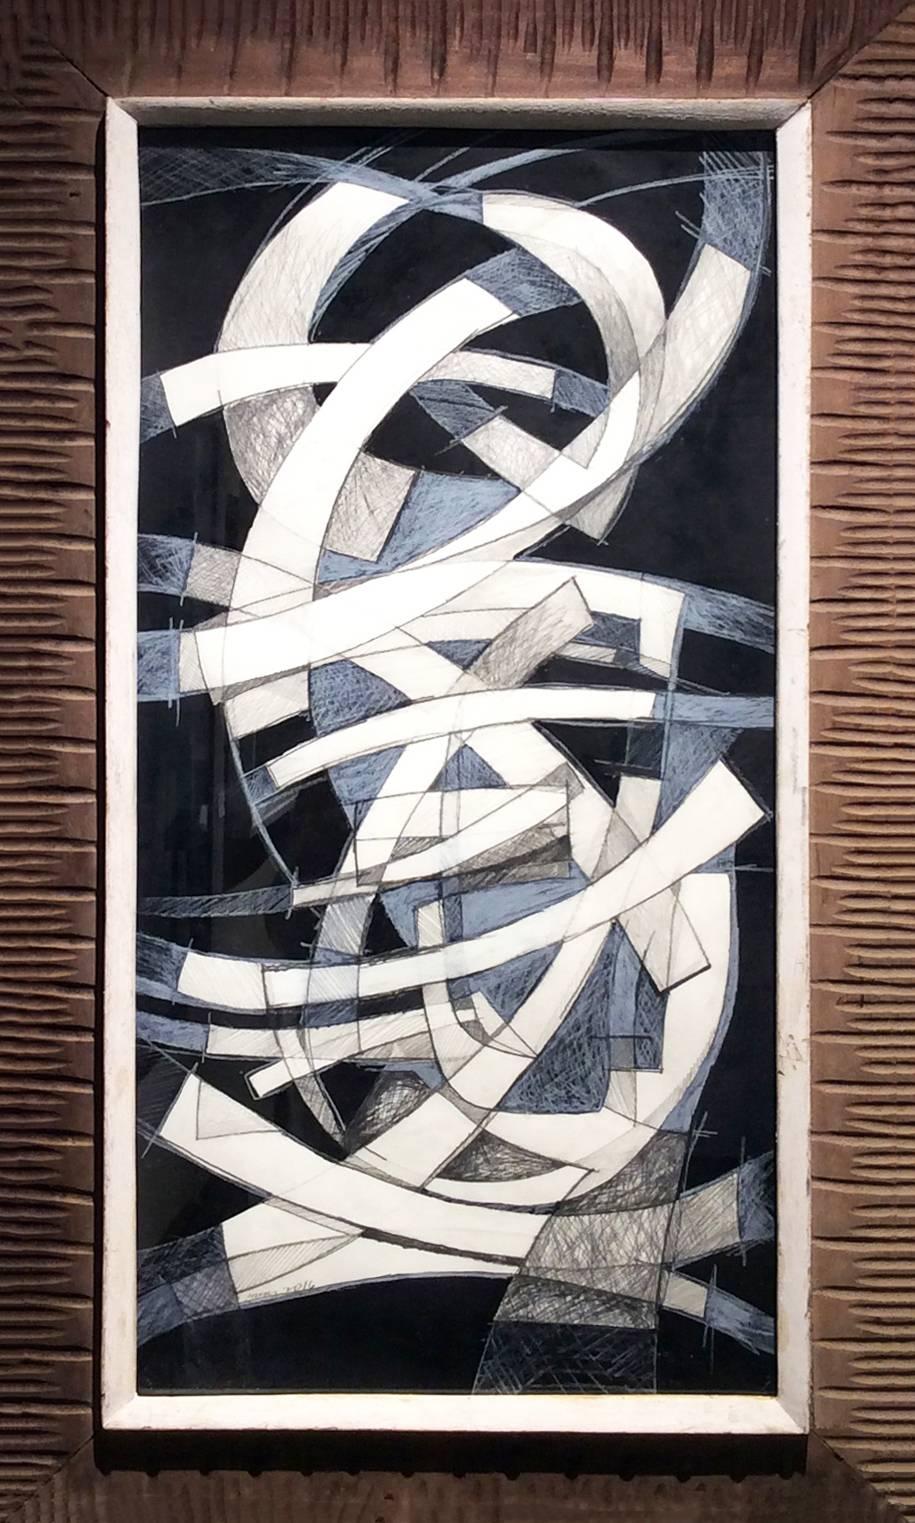 David Dew Bruner Abstract Drawing - Arch I (Abstract Black, White & Blue Drawing in Mid Century Modern Wood Frame)